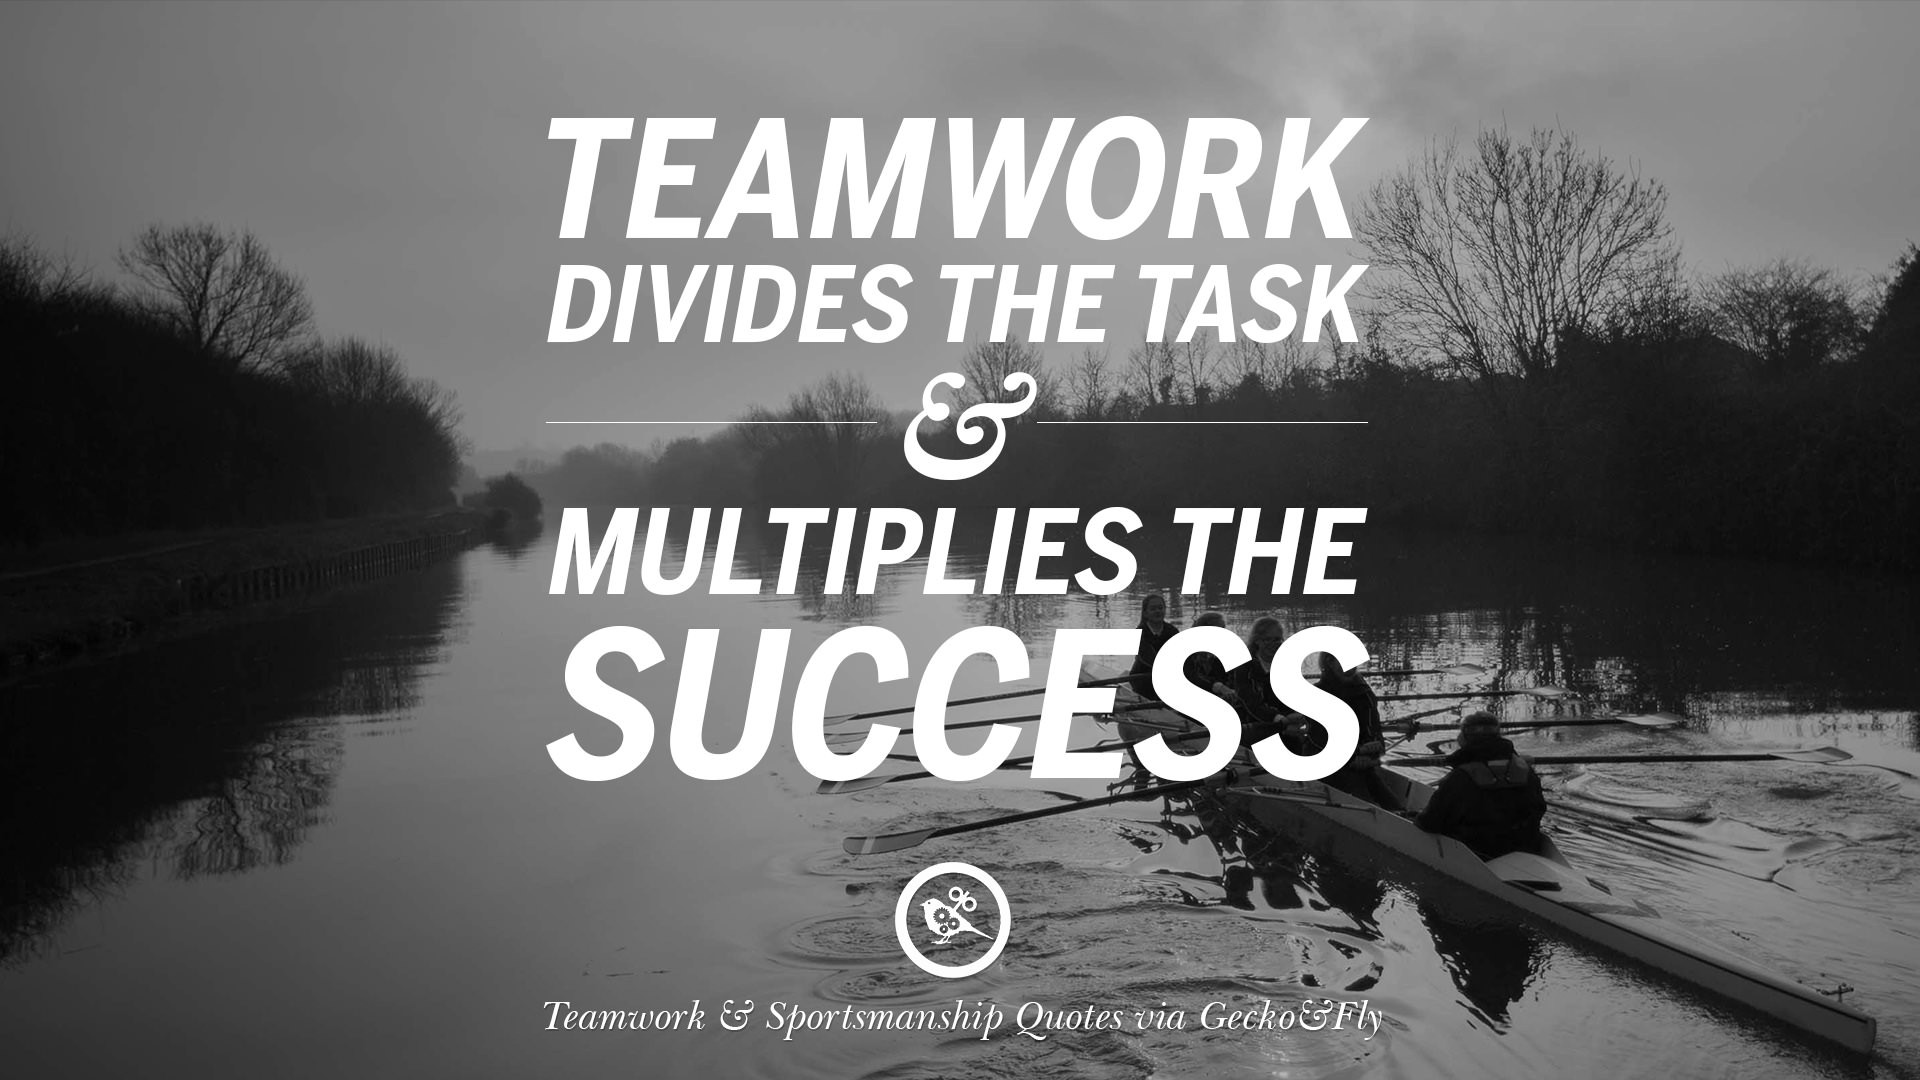 Positive Teamwork Quotes
 50 Inspirational Quotes About Teamwork And Sportsmanship